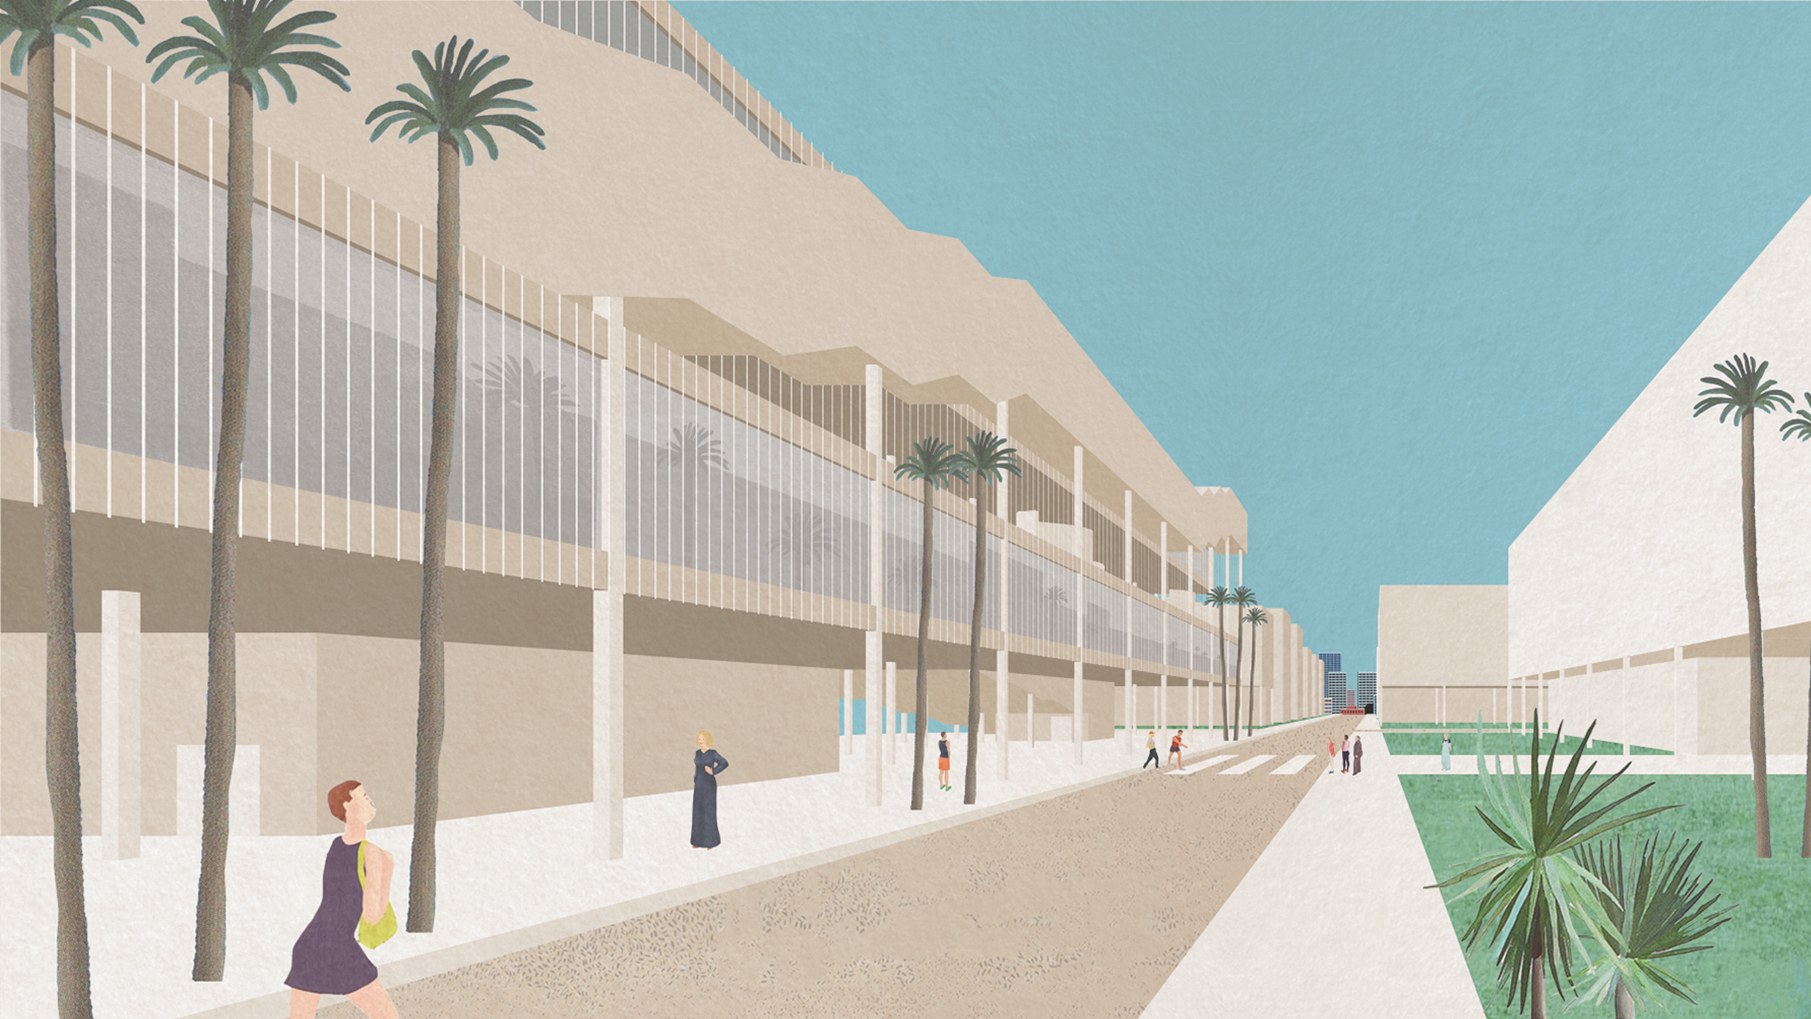 digital perspective drawing of a convention center type of building on the left, a street in the middle running from the foreground to the background, and some green space on the right side of the street